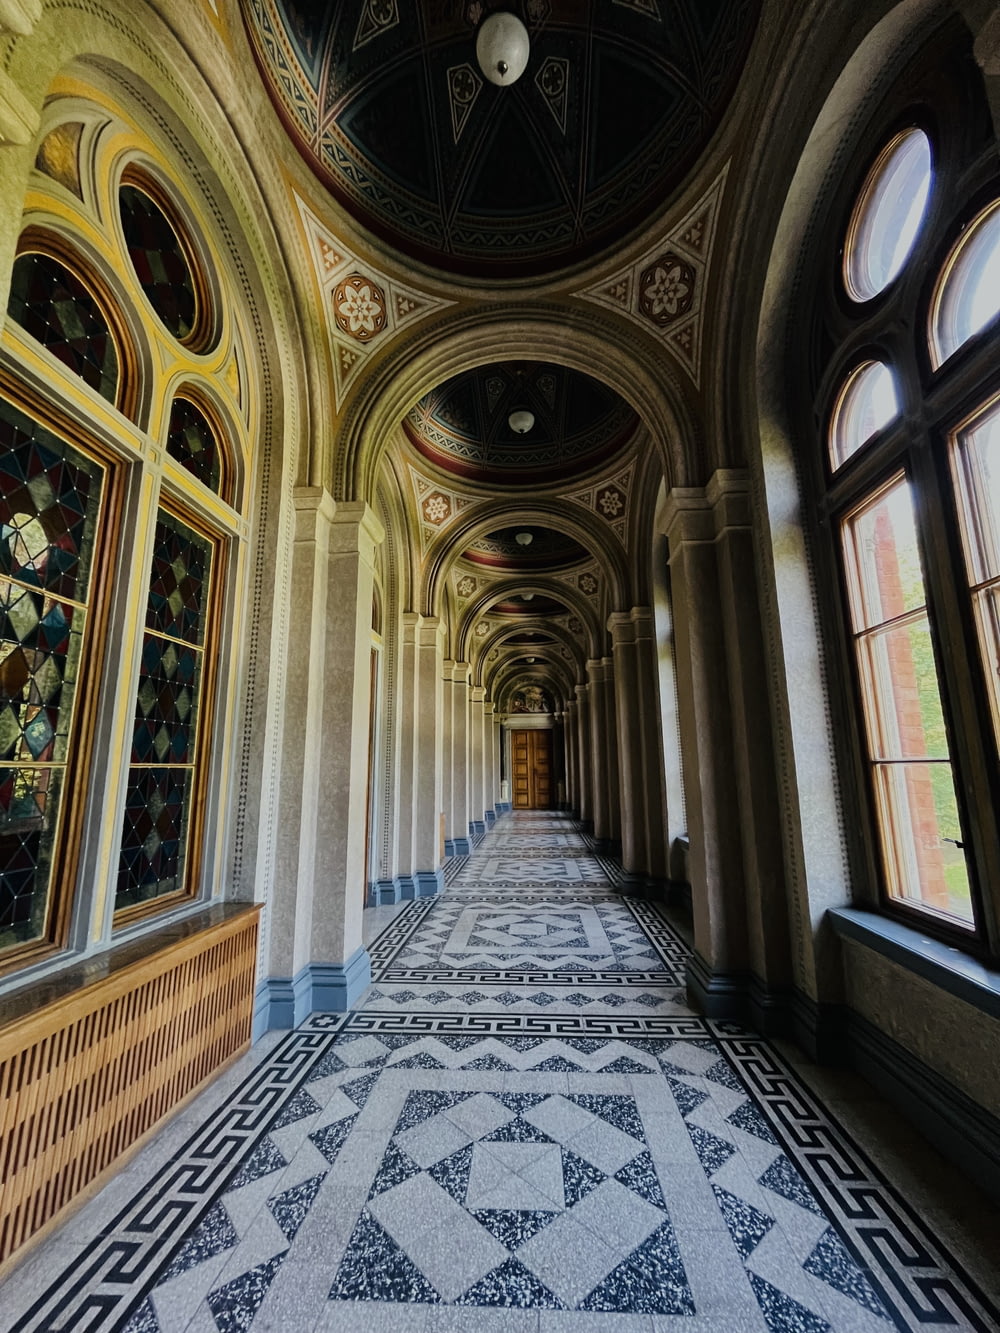 a long hallway with many windows and a tiled floor